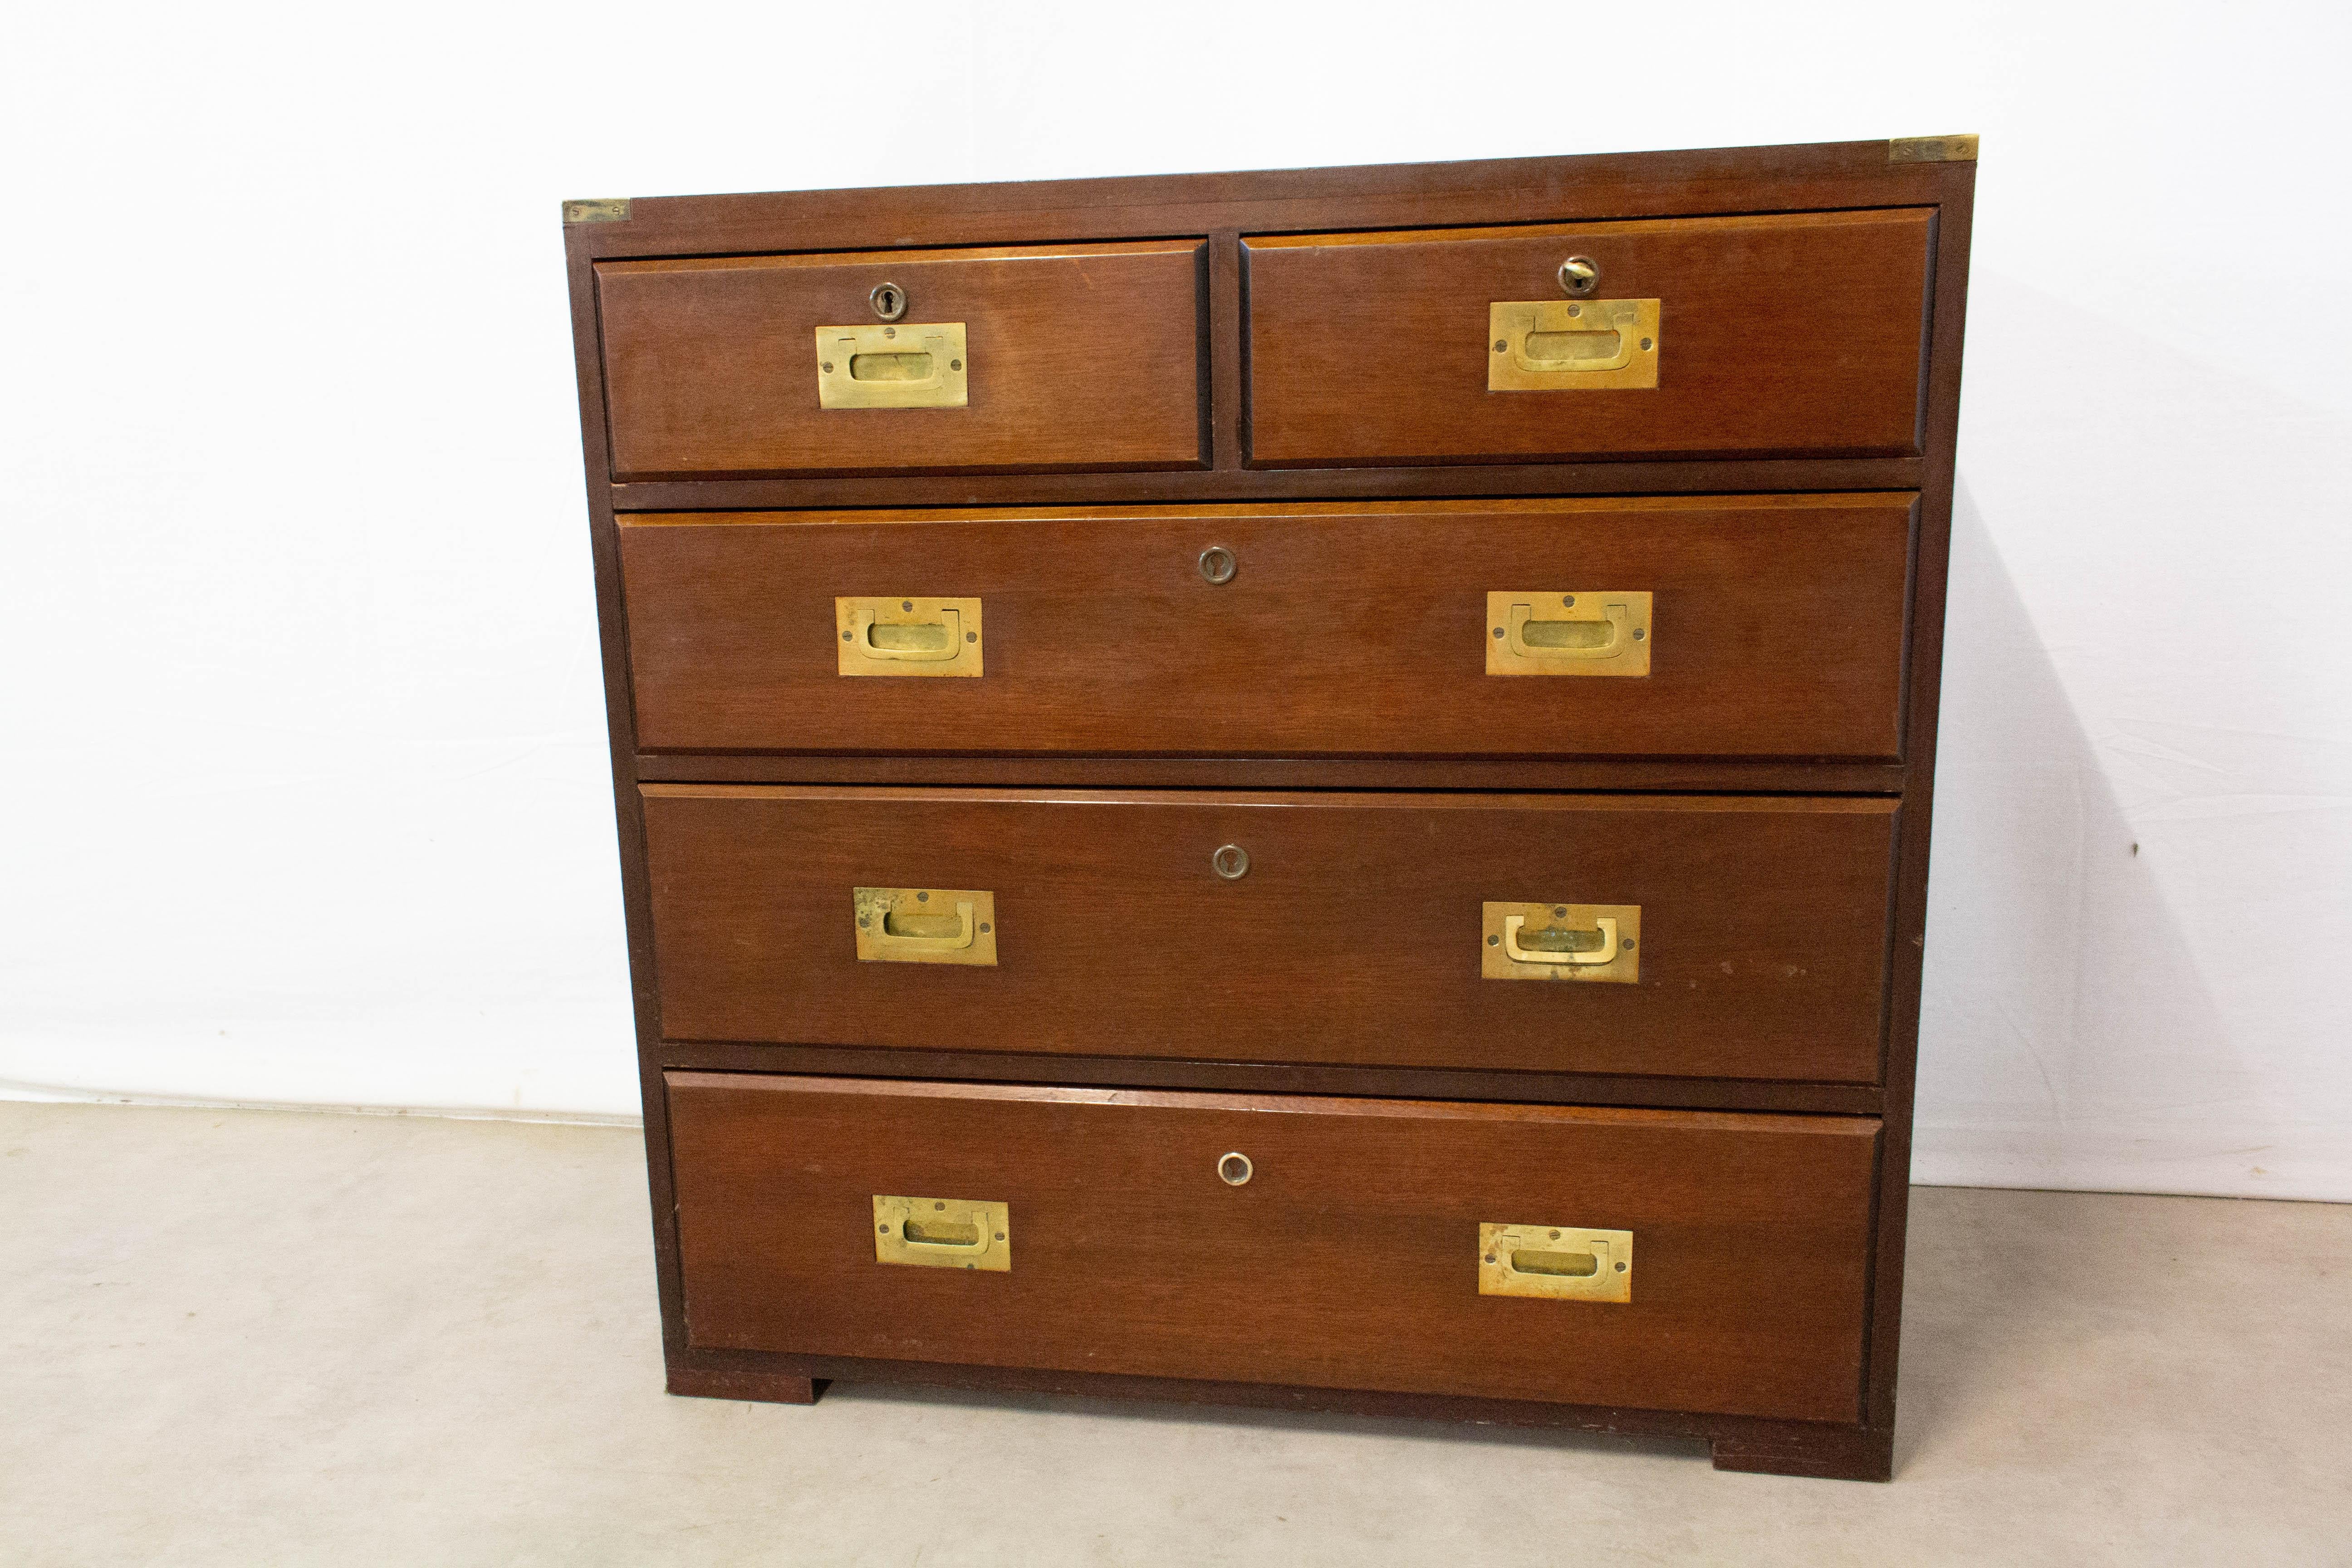 Commode or chest of drawers in the English military campaign style.
20th century
Good condition age with minor marks of use.